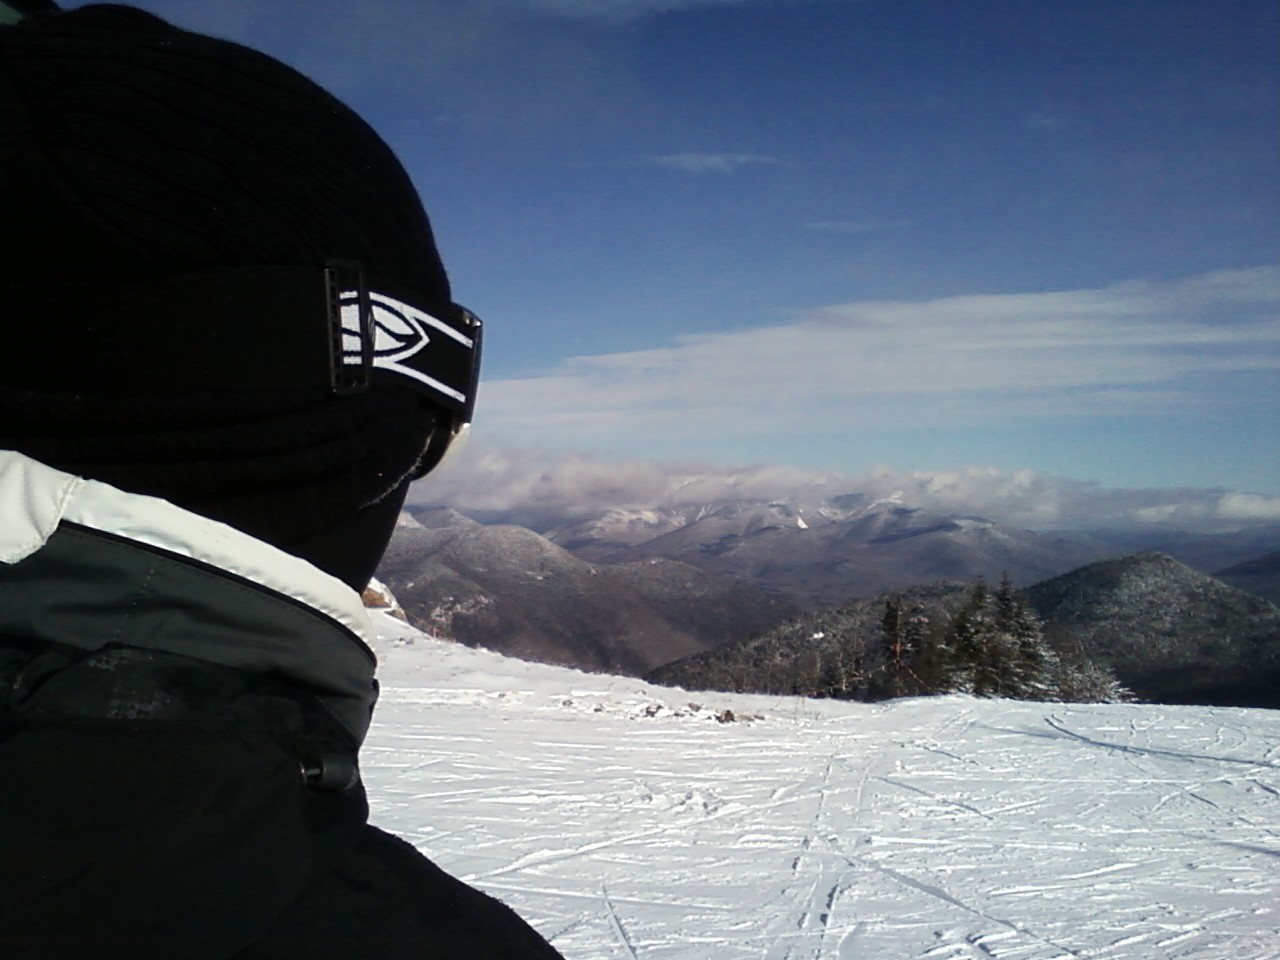 Atop Loon Mountain (user submitted)